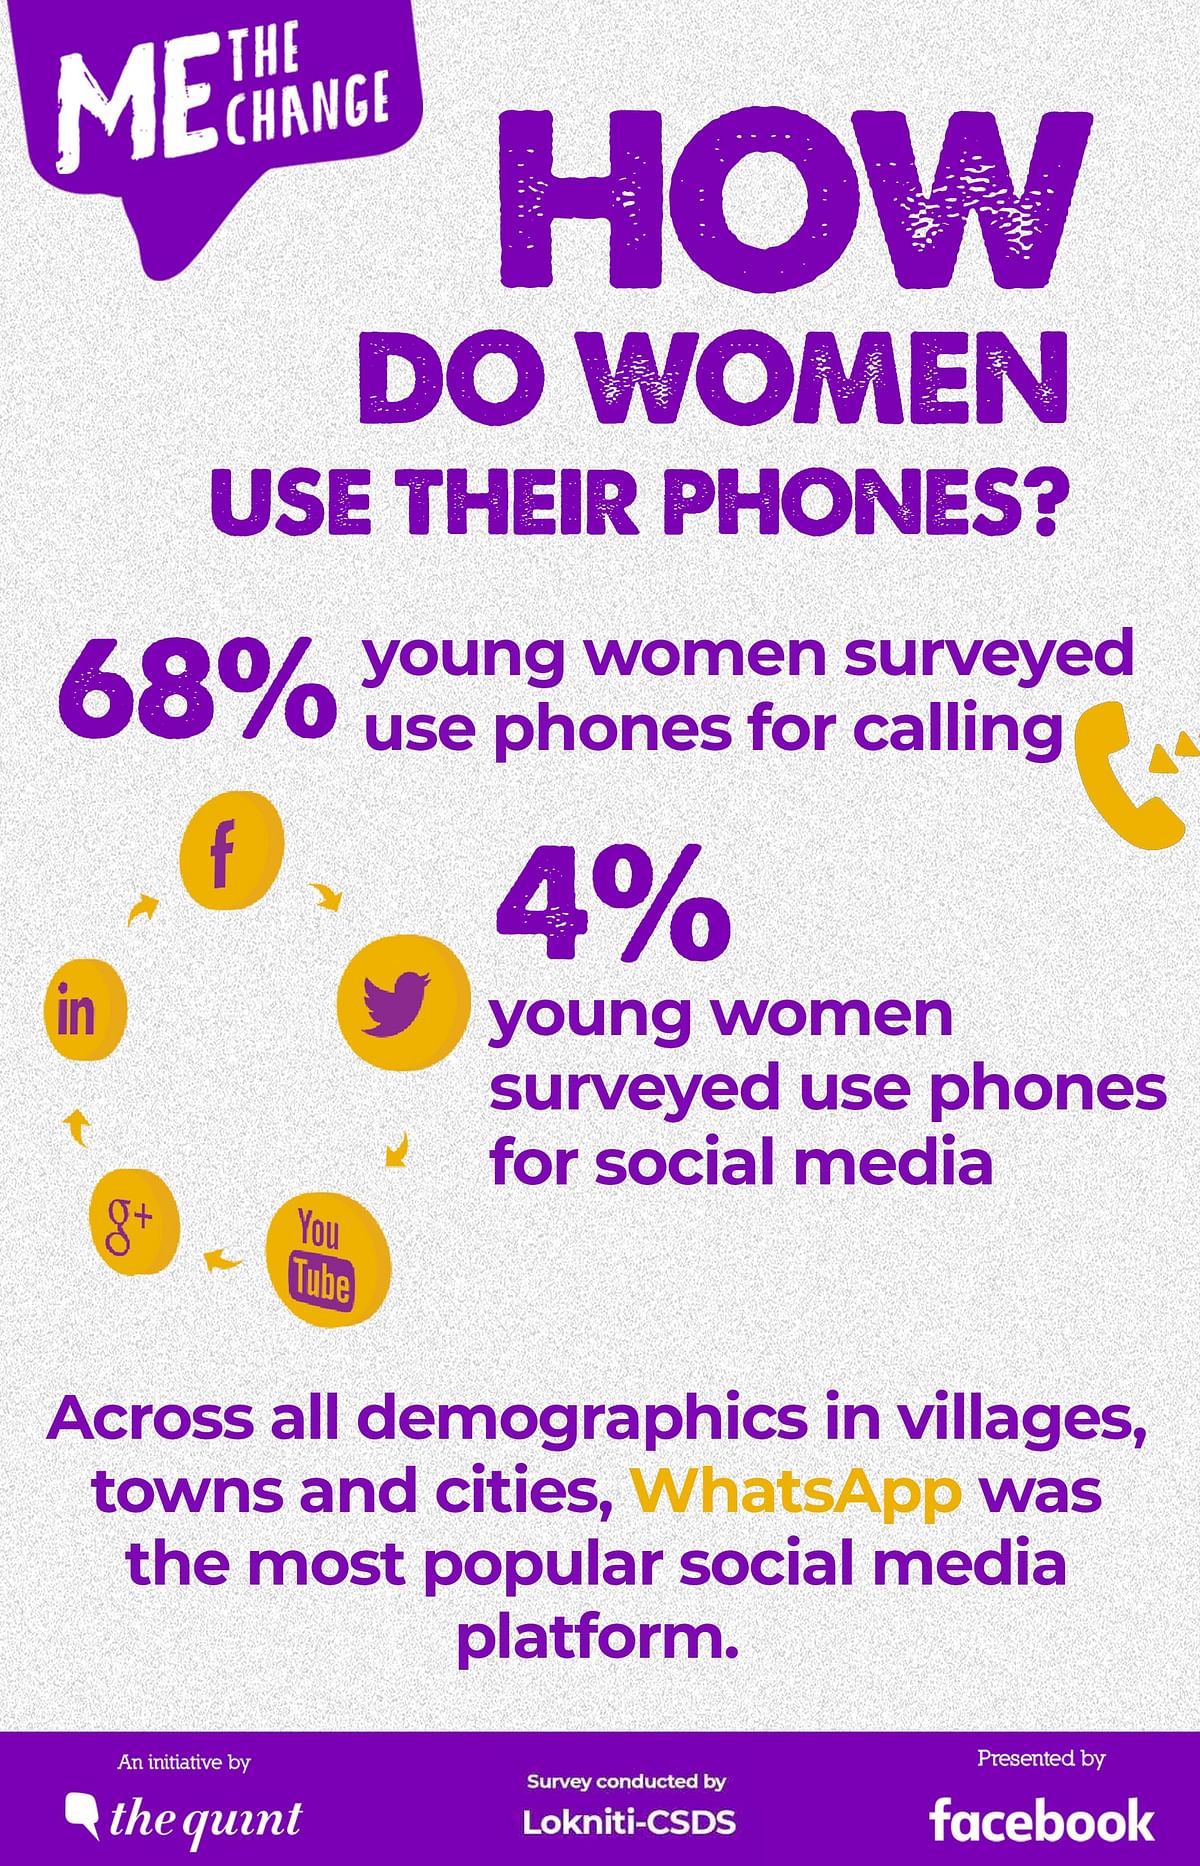 According to the survey, more than three-fourth of the women surveyed said that they own a mobile phone.